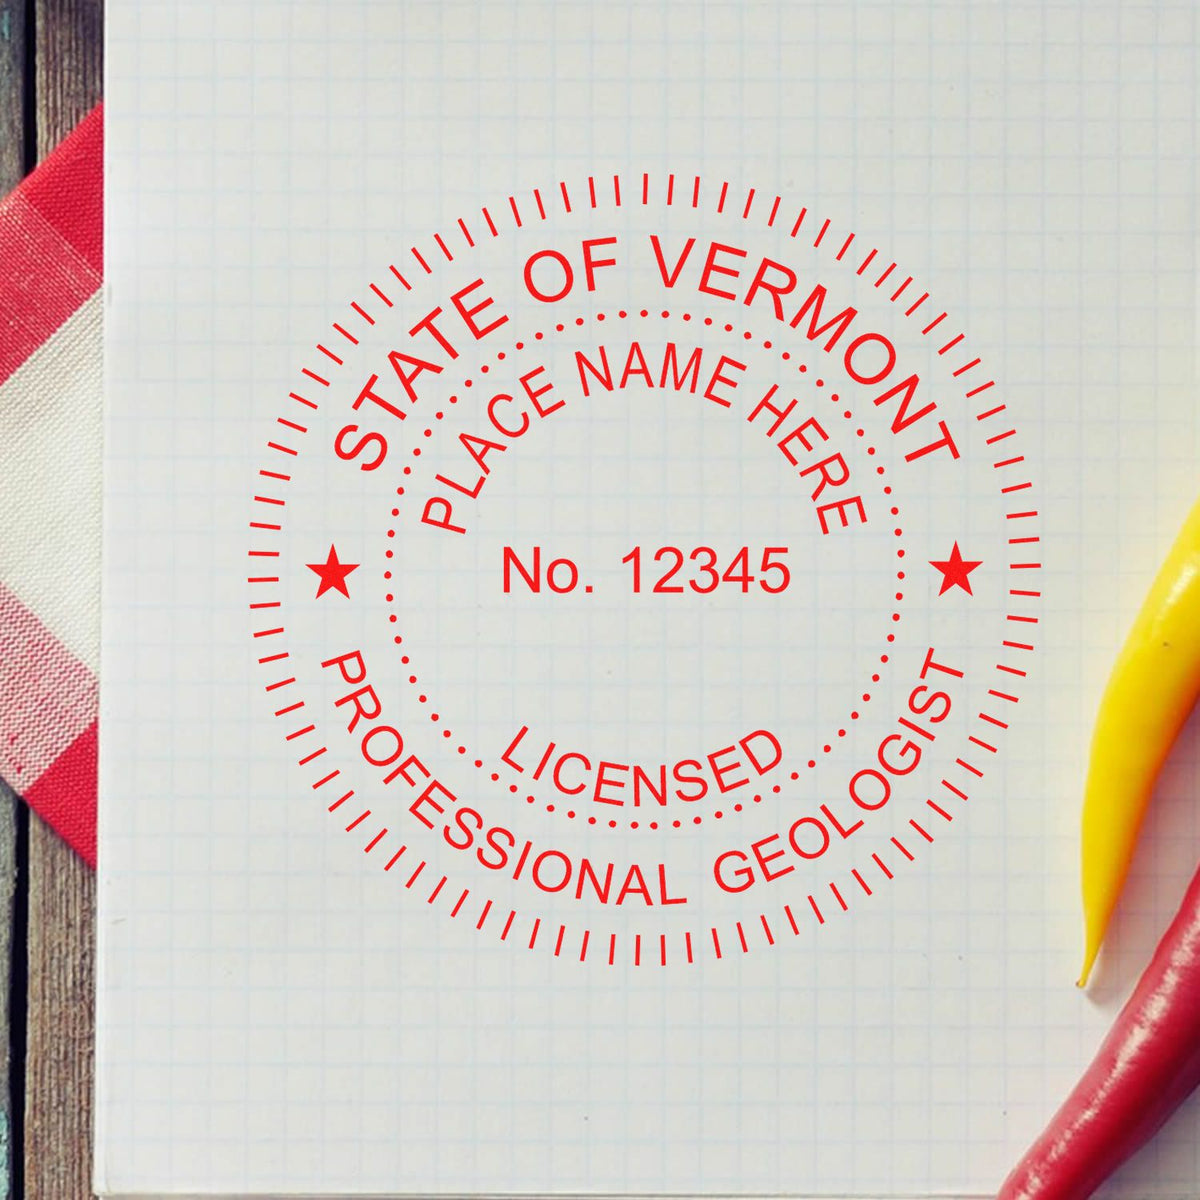 The Premium MaxLight Pre-Inked Vermont Geology Stamp stamp impression comes to life with a crisp, detailed image stamped on paper - showcasing true professional quality.